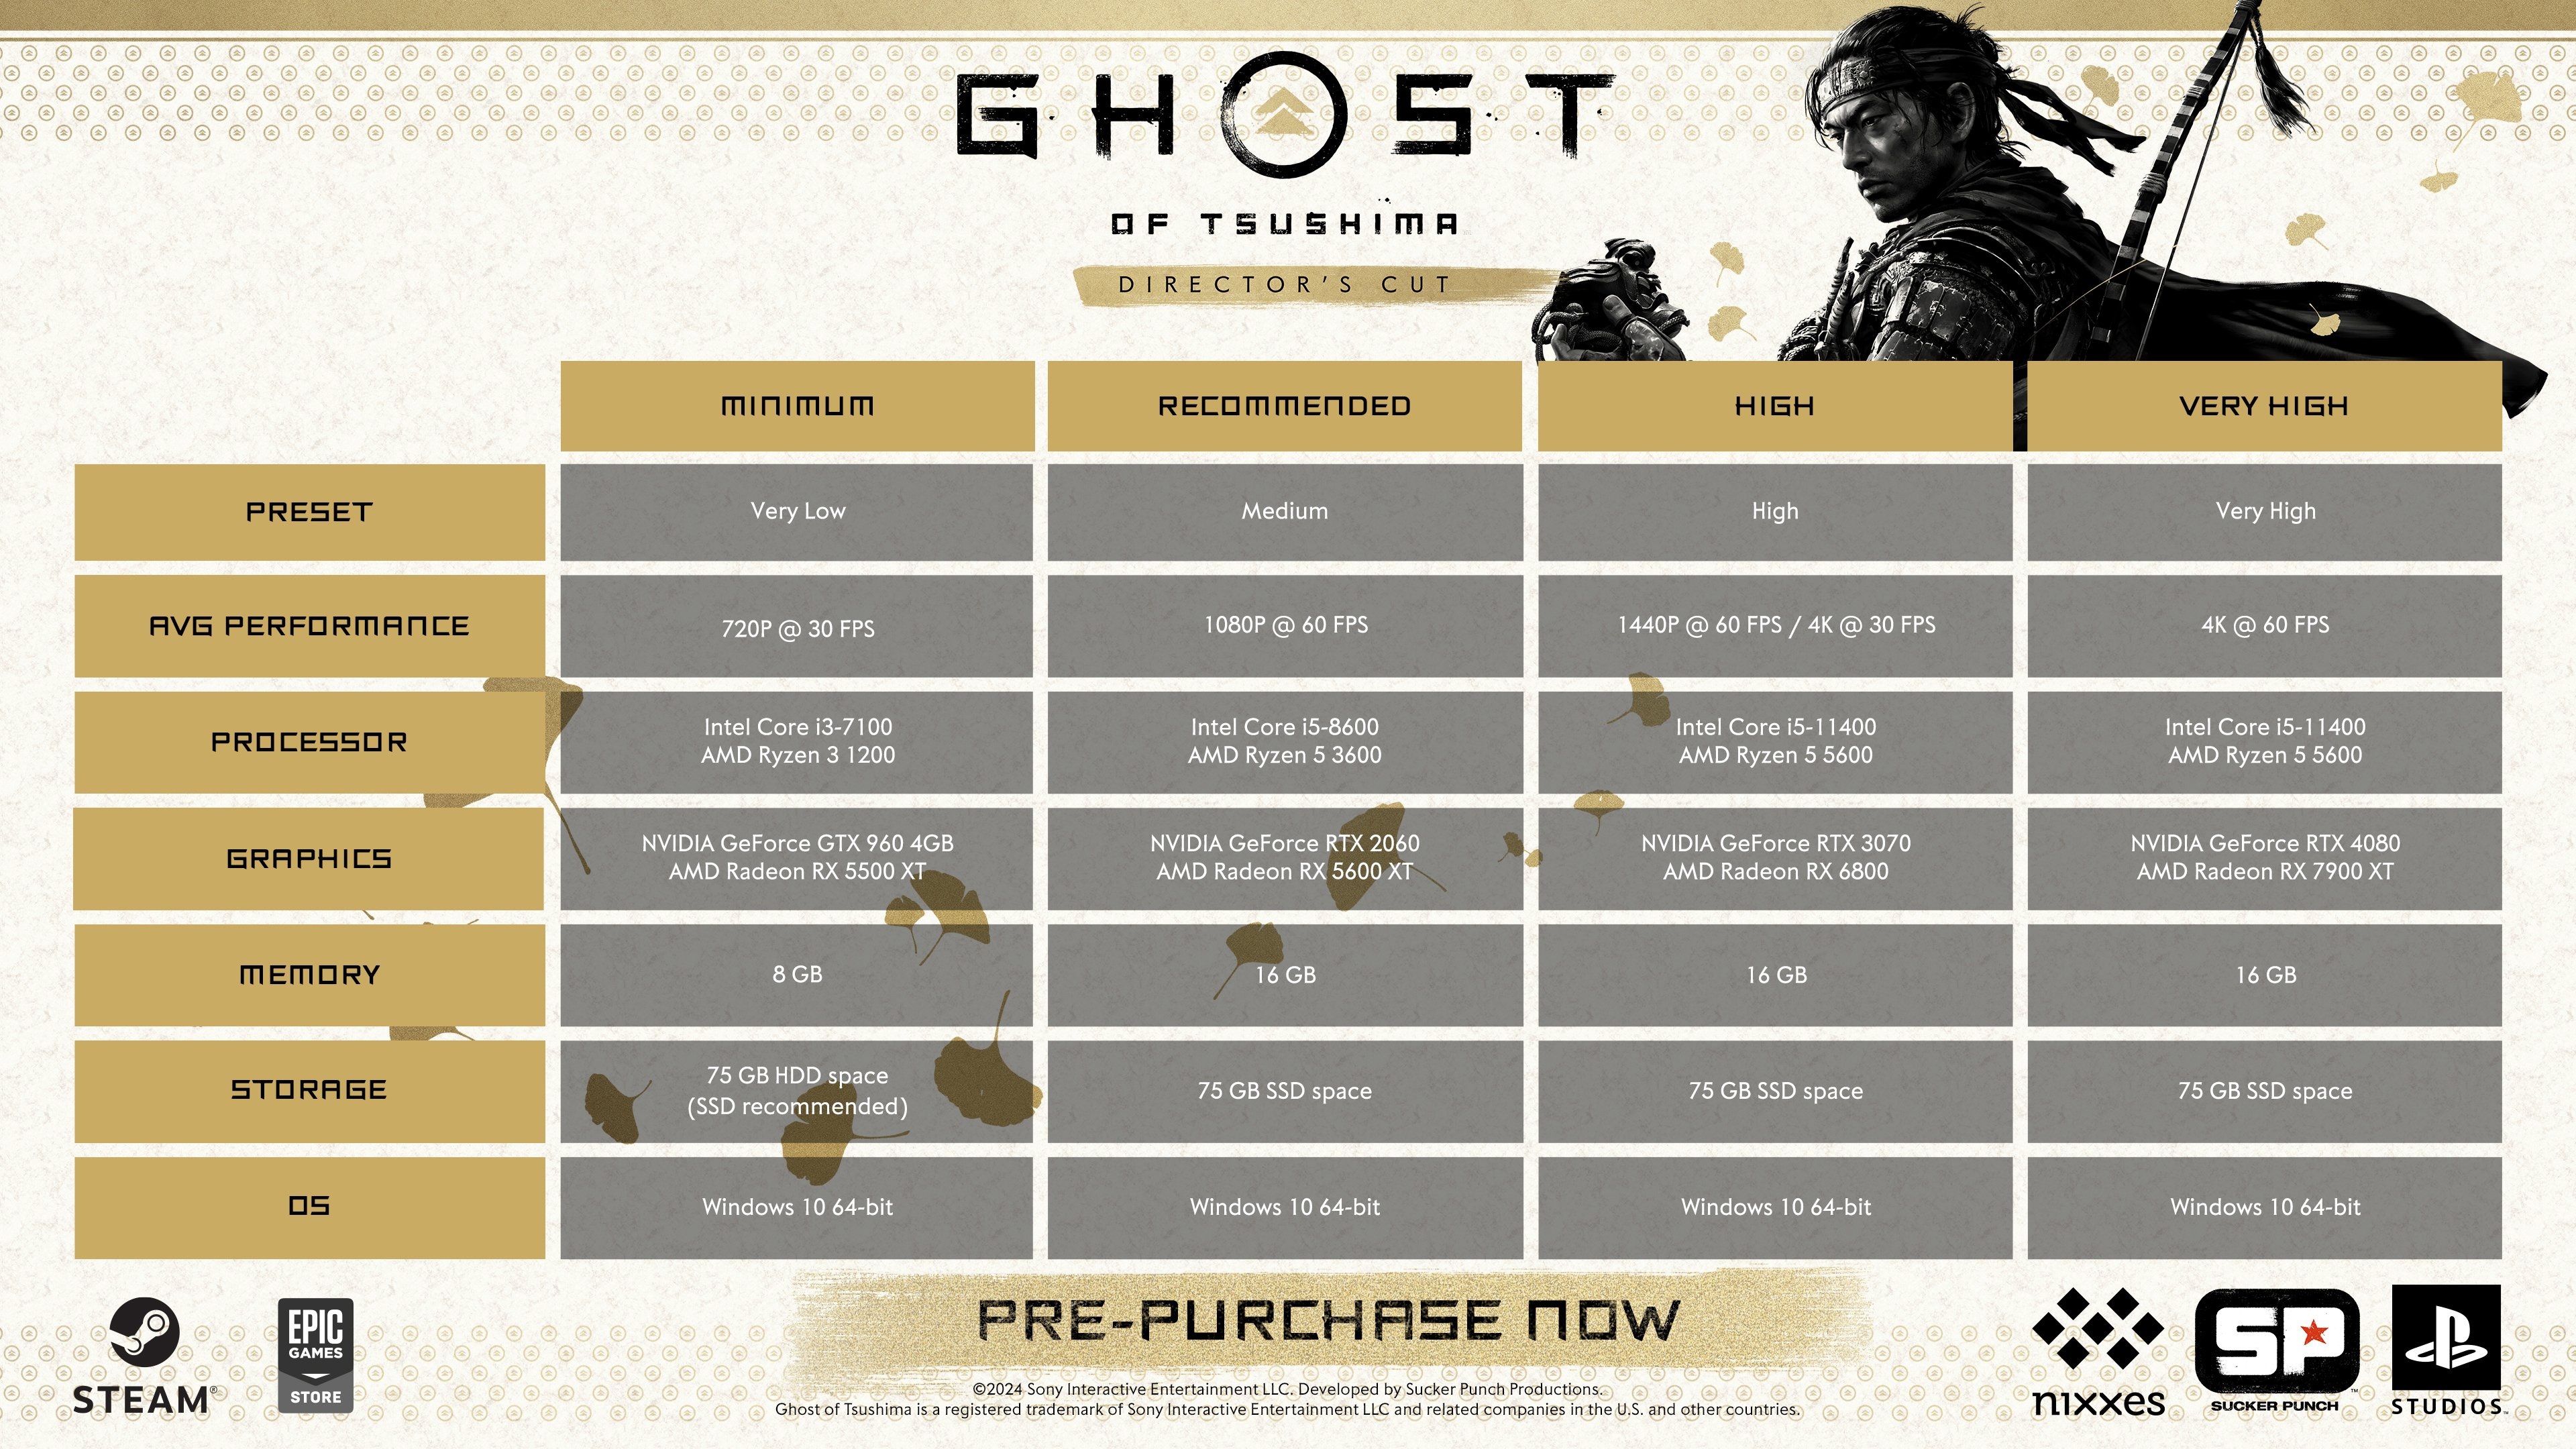 System requirements for Ghost of Tsushima on PC.